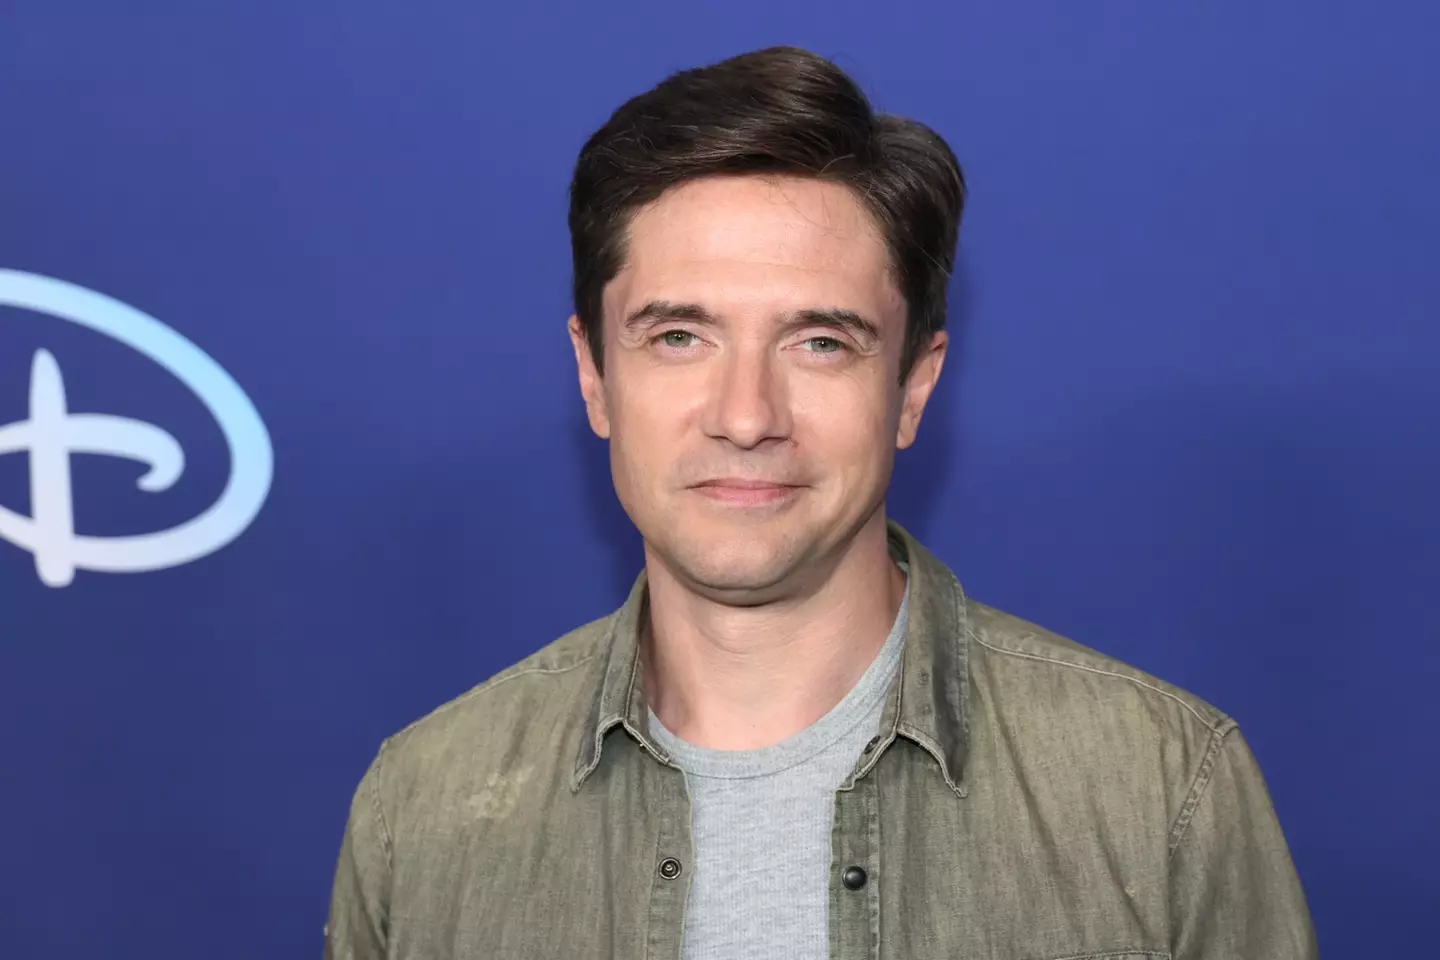 Topher Grace did not write a letter in support of Danny Masterson.